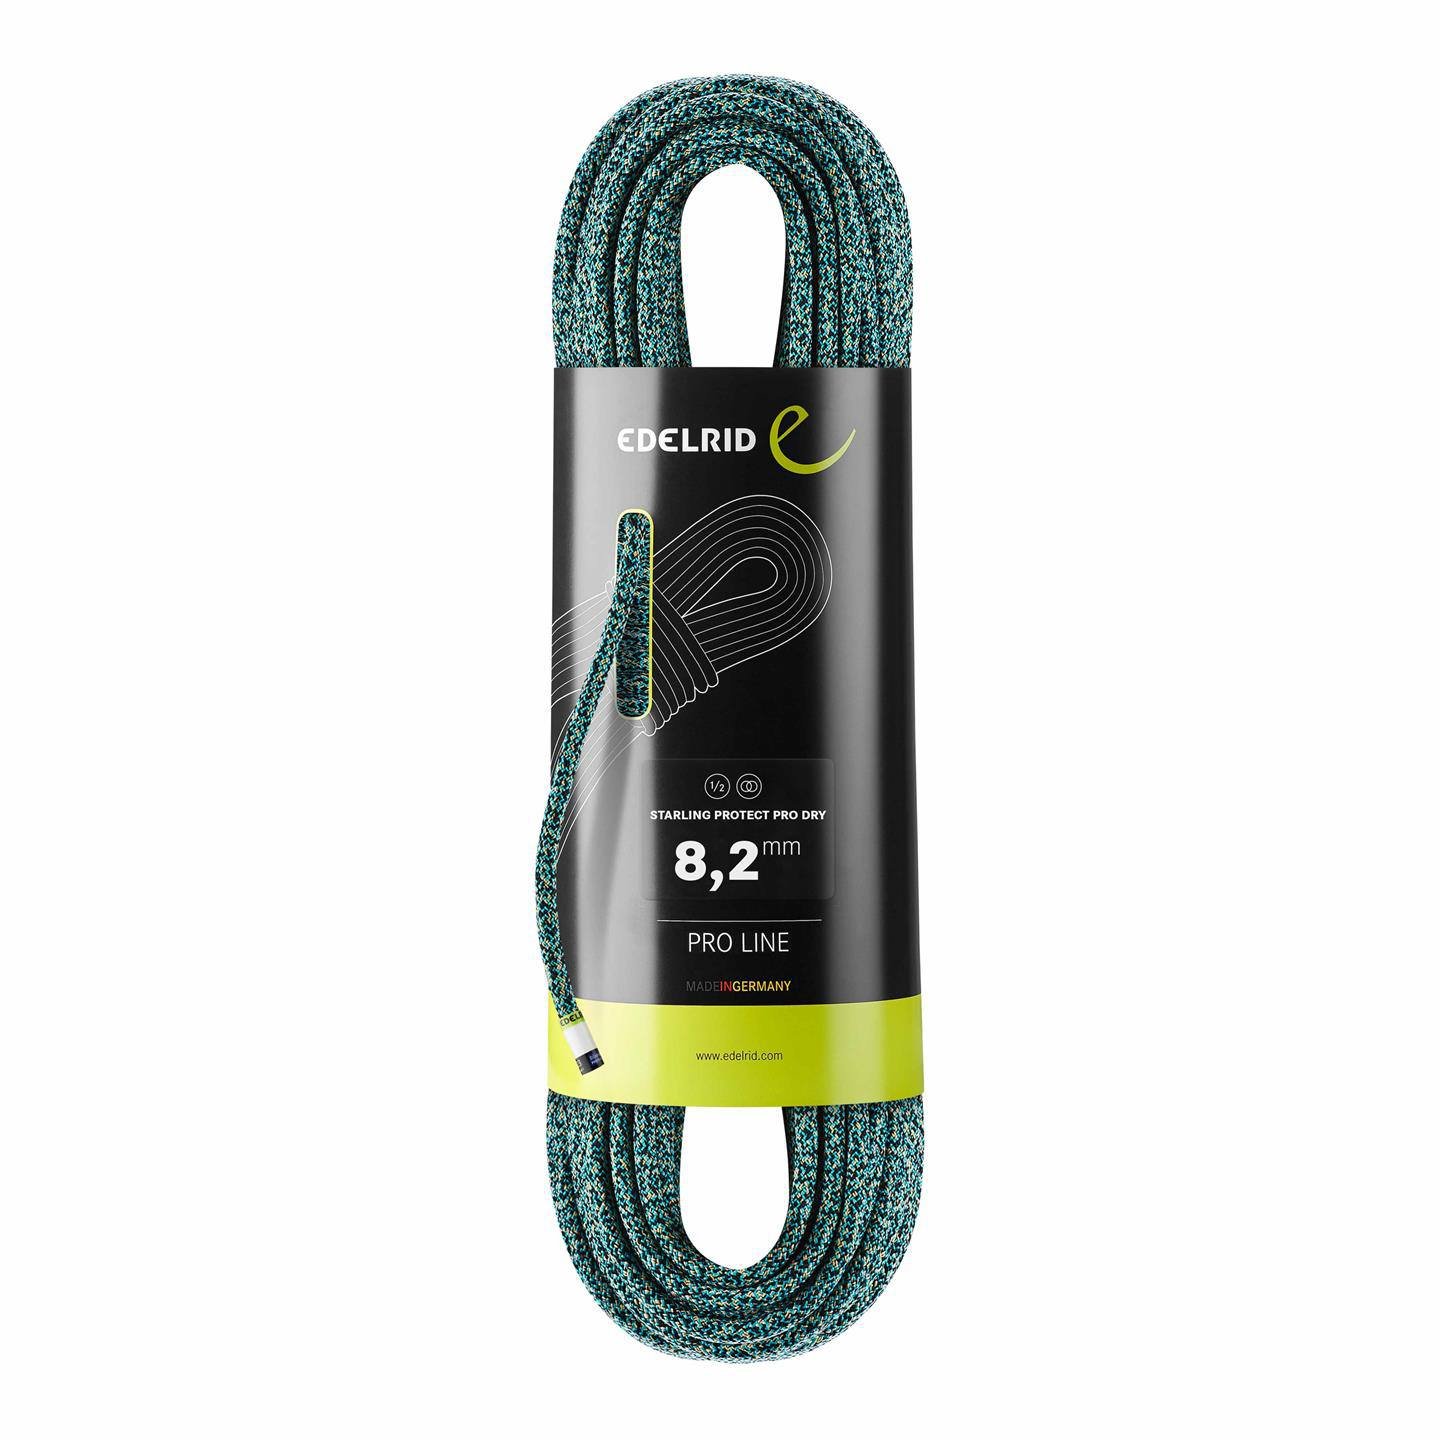 Edelrid Starling Protect Pro Dry 8,2mm